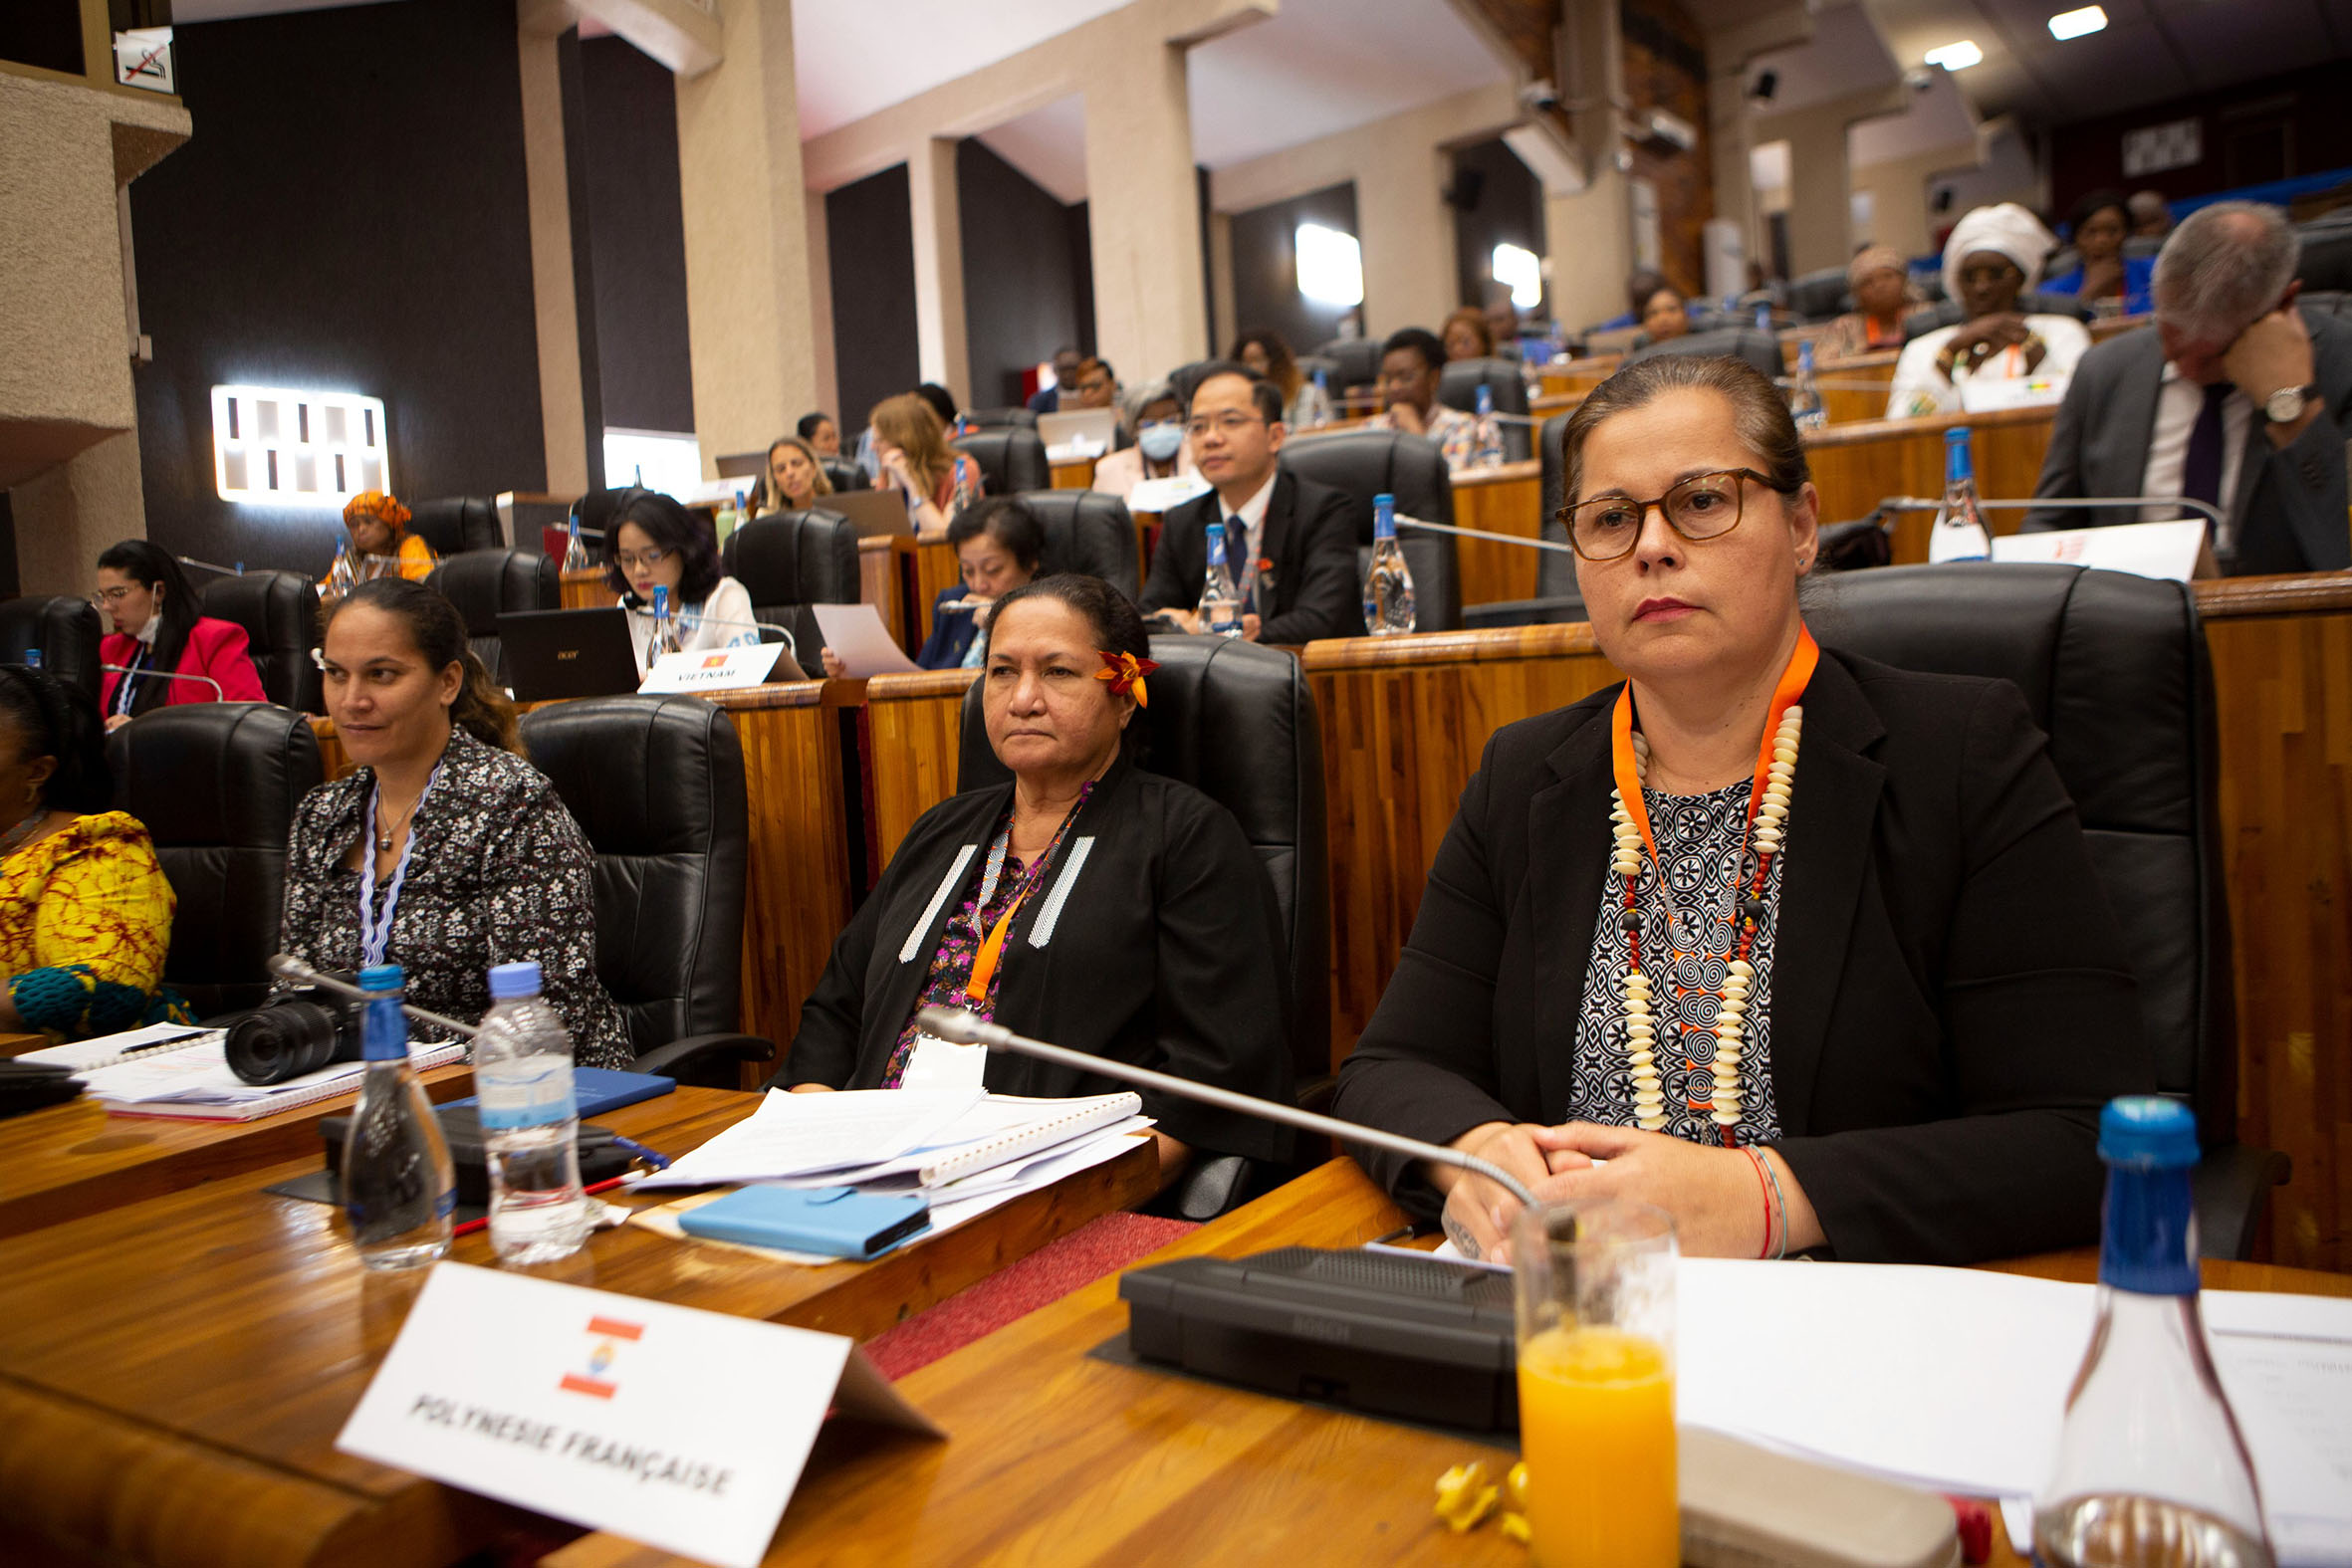 Parliamentarians from the Francophonie bloc at the 47th session of the grouping in Kigali on Wednesday, July 6. / Photo: Courtesy.